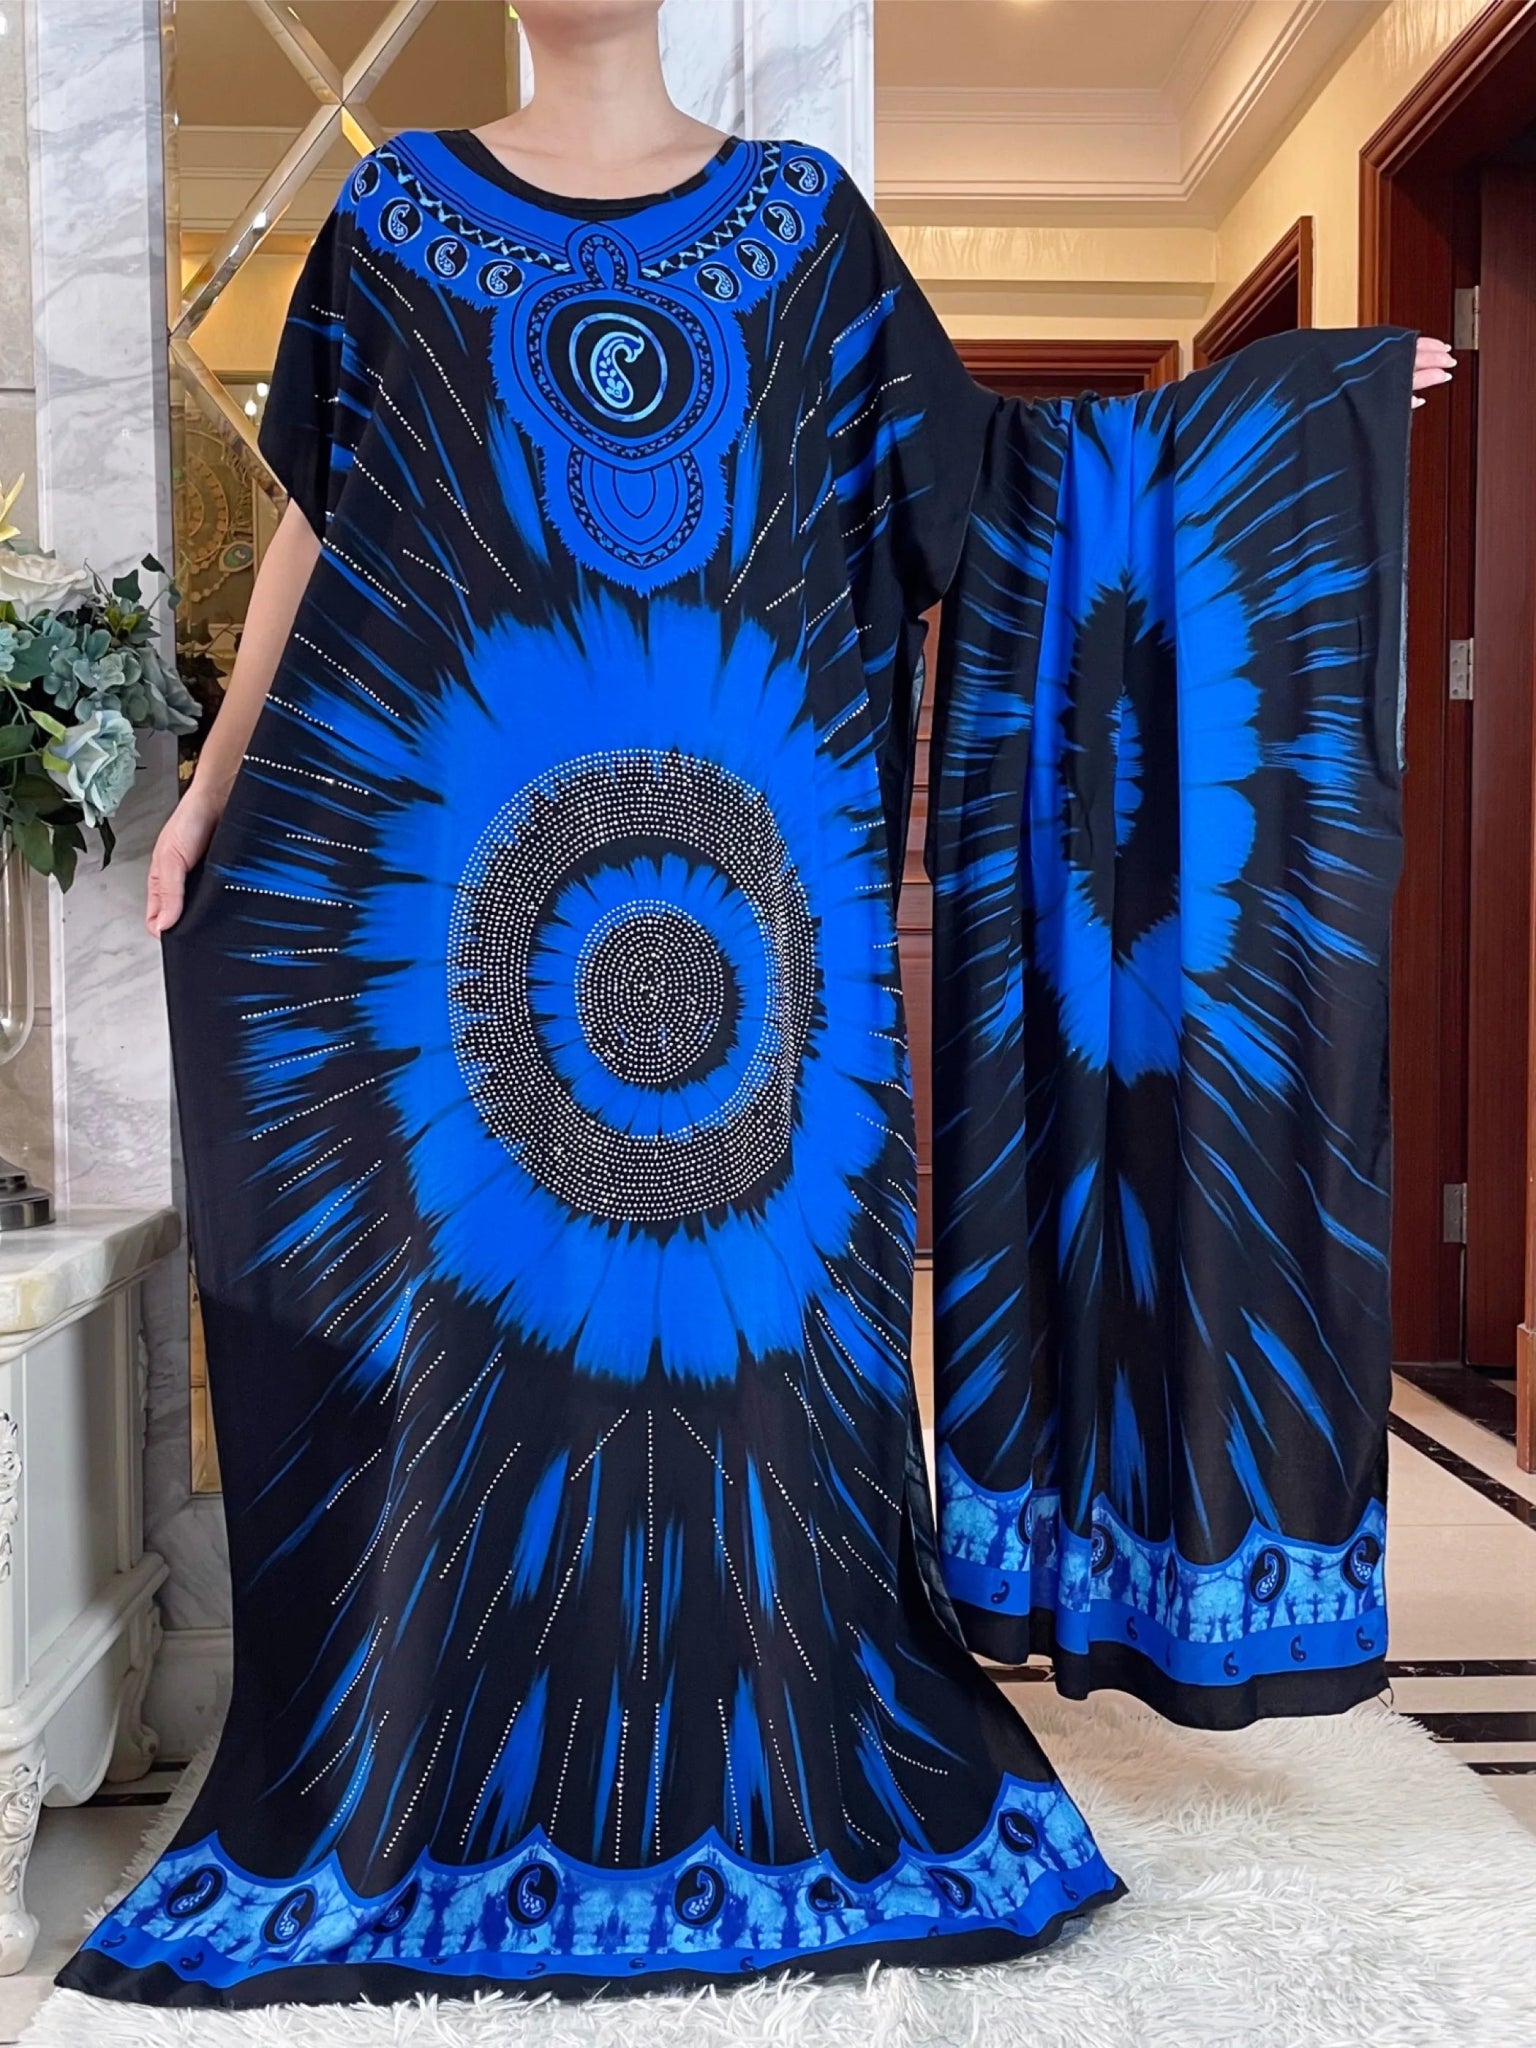 African Summer Abaya Dress: Short Sleeve Dashiki Design with Oversized Floral Scarf - Flexi Africa - Flexi Africa offers Free Delivery Worldwide - Vibrant African traditional clothing showcasing bold prints and intricate designs